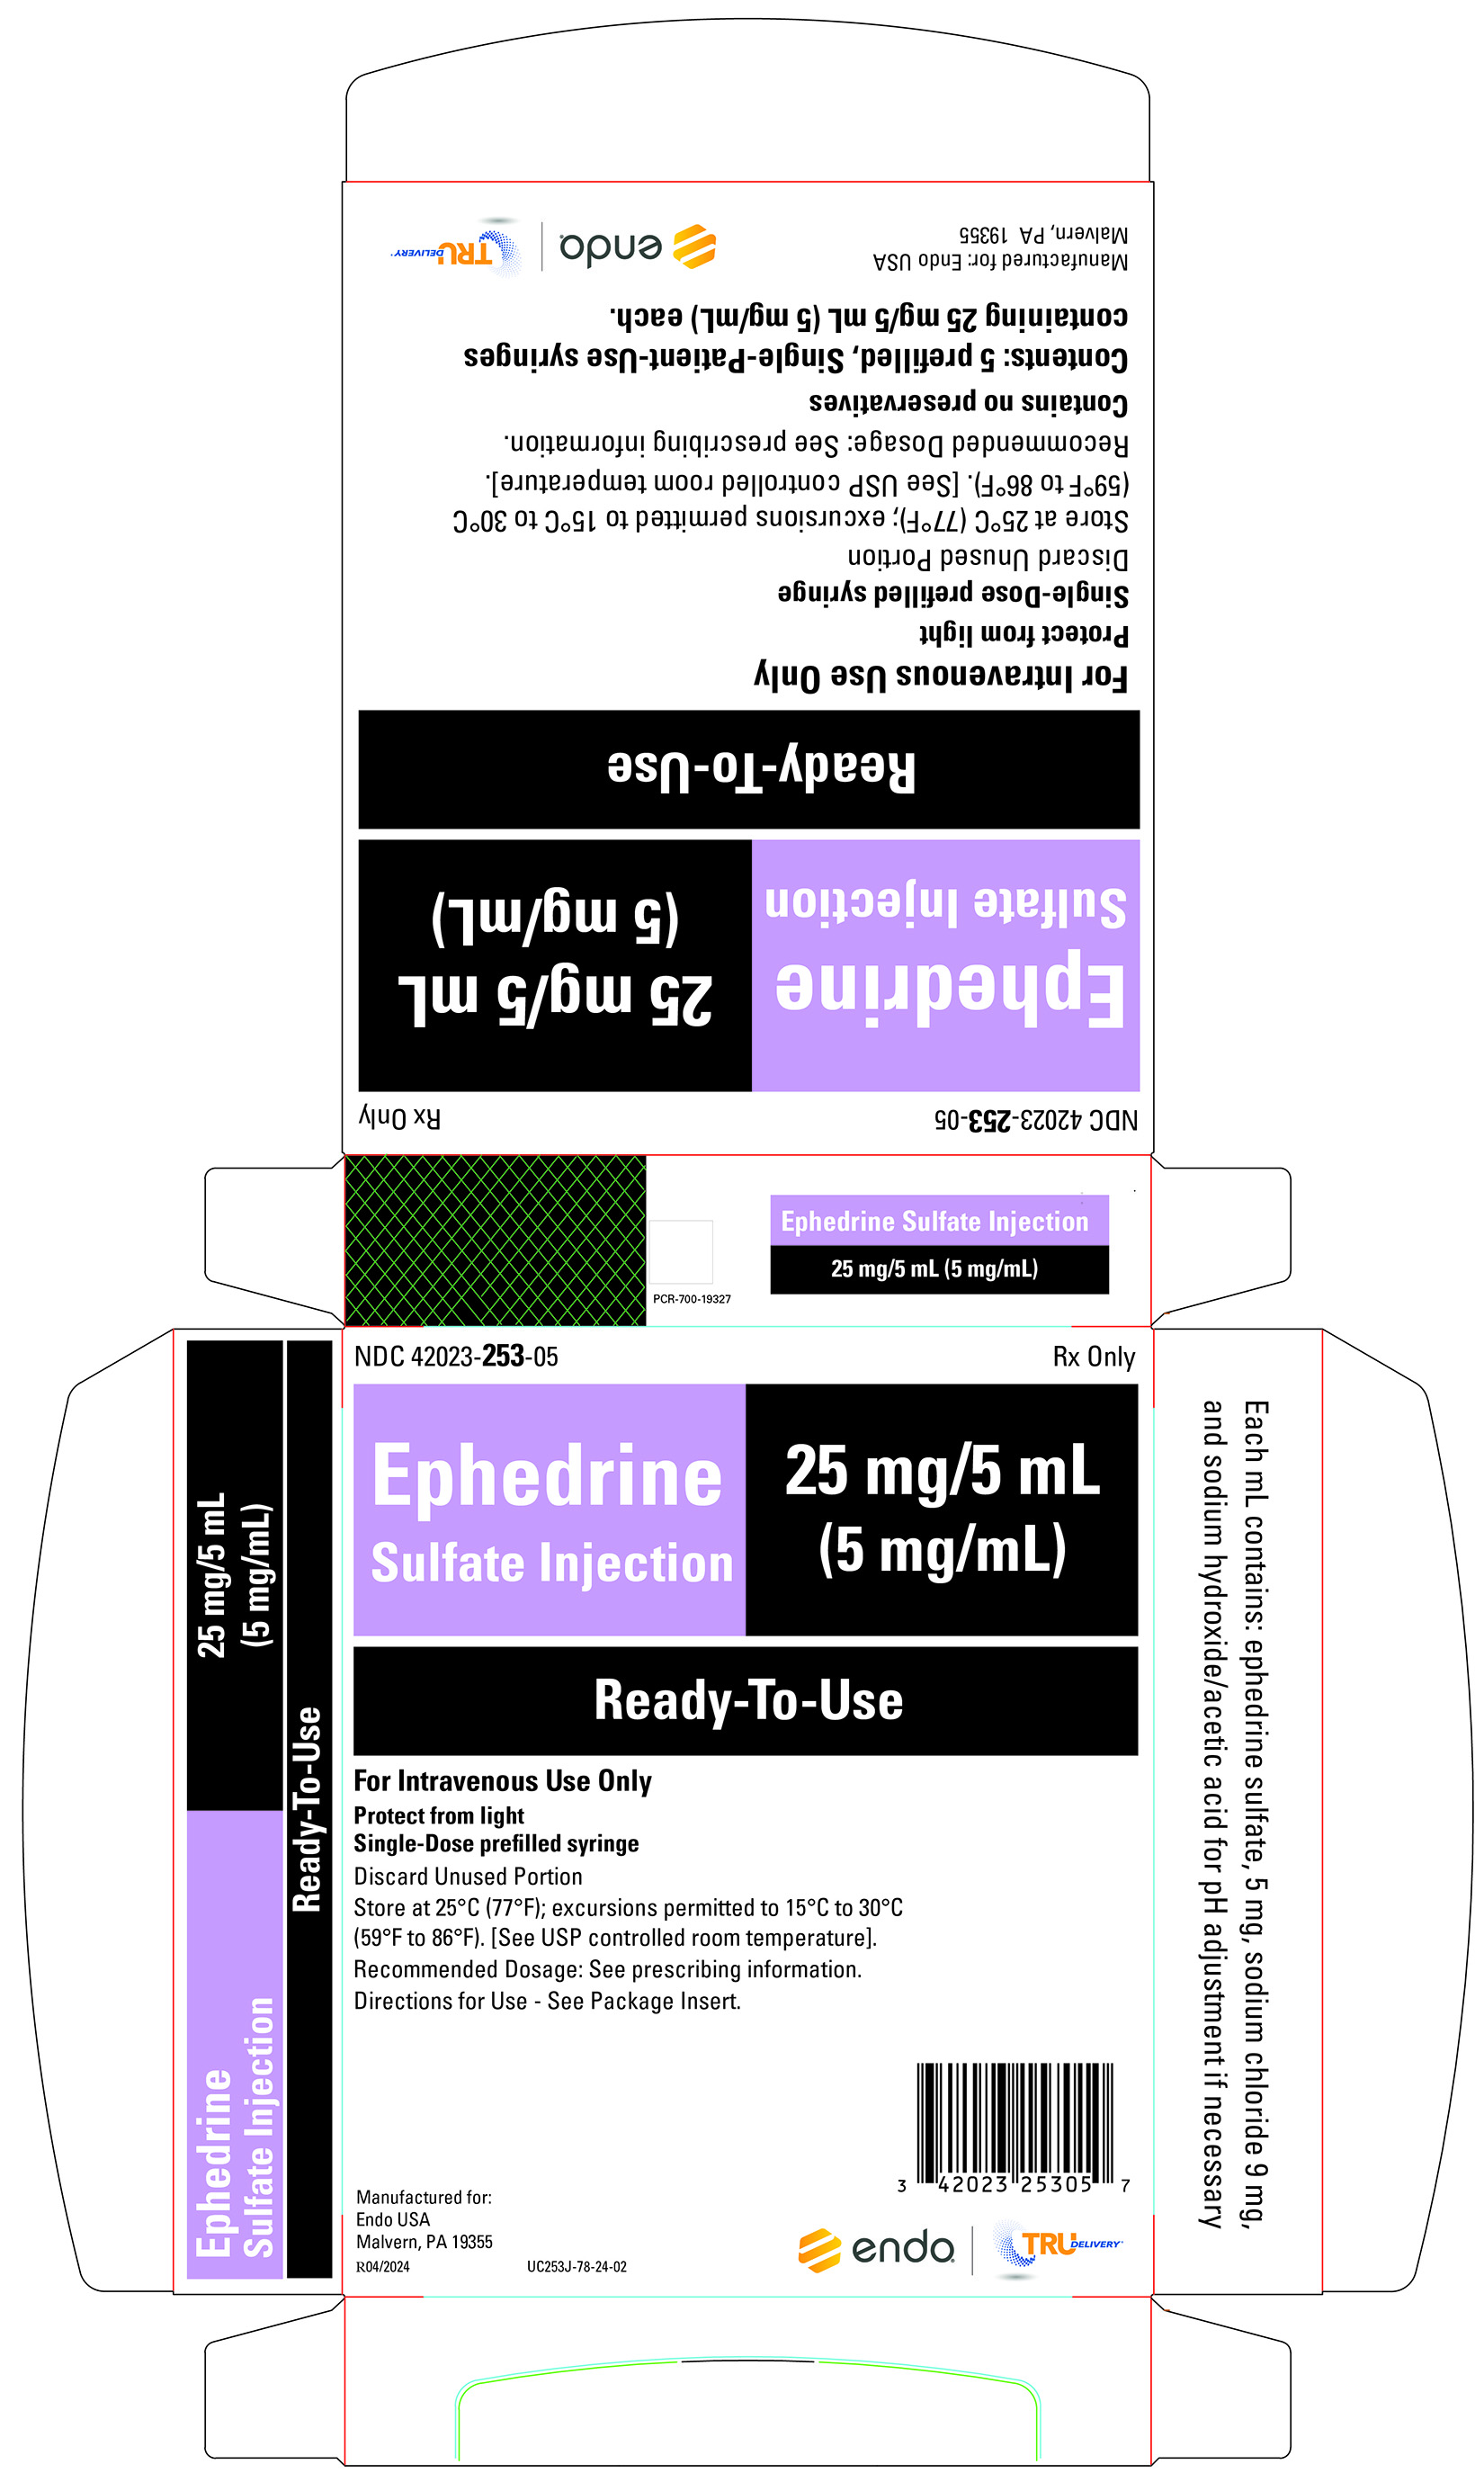 This an image of the carton for Ephedrine Sulfate Injection 25 mg/5 mL (5 mg/mL) Ready-To-Use.